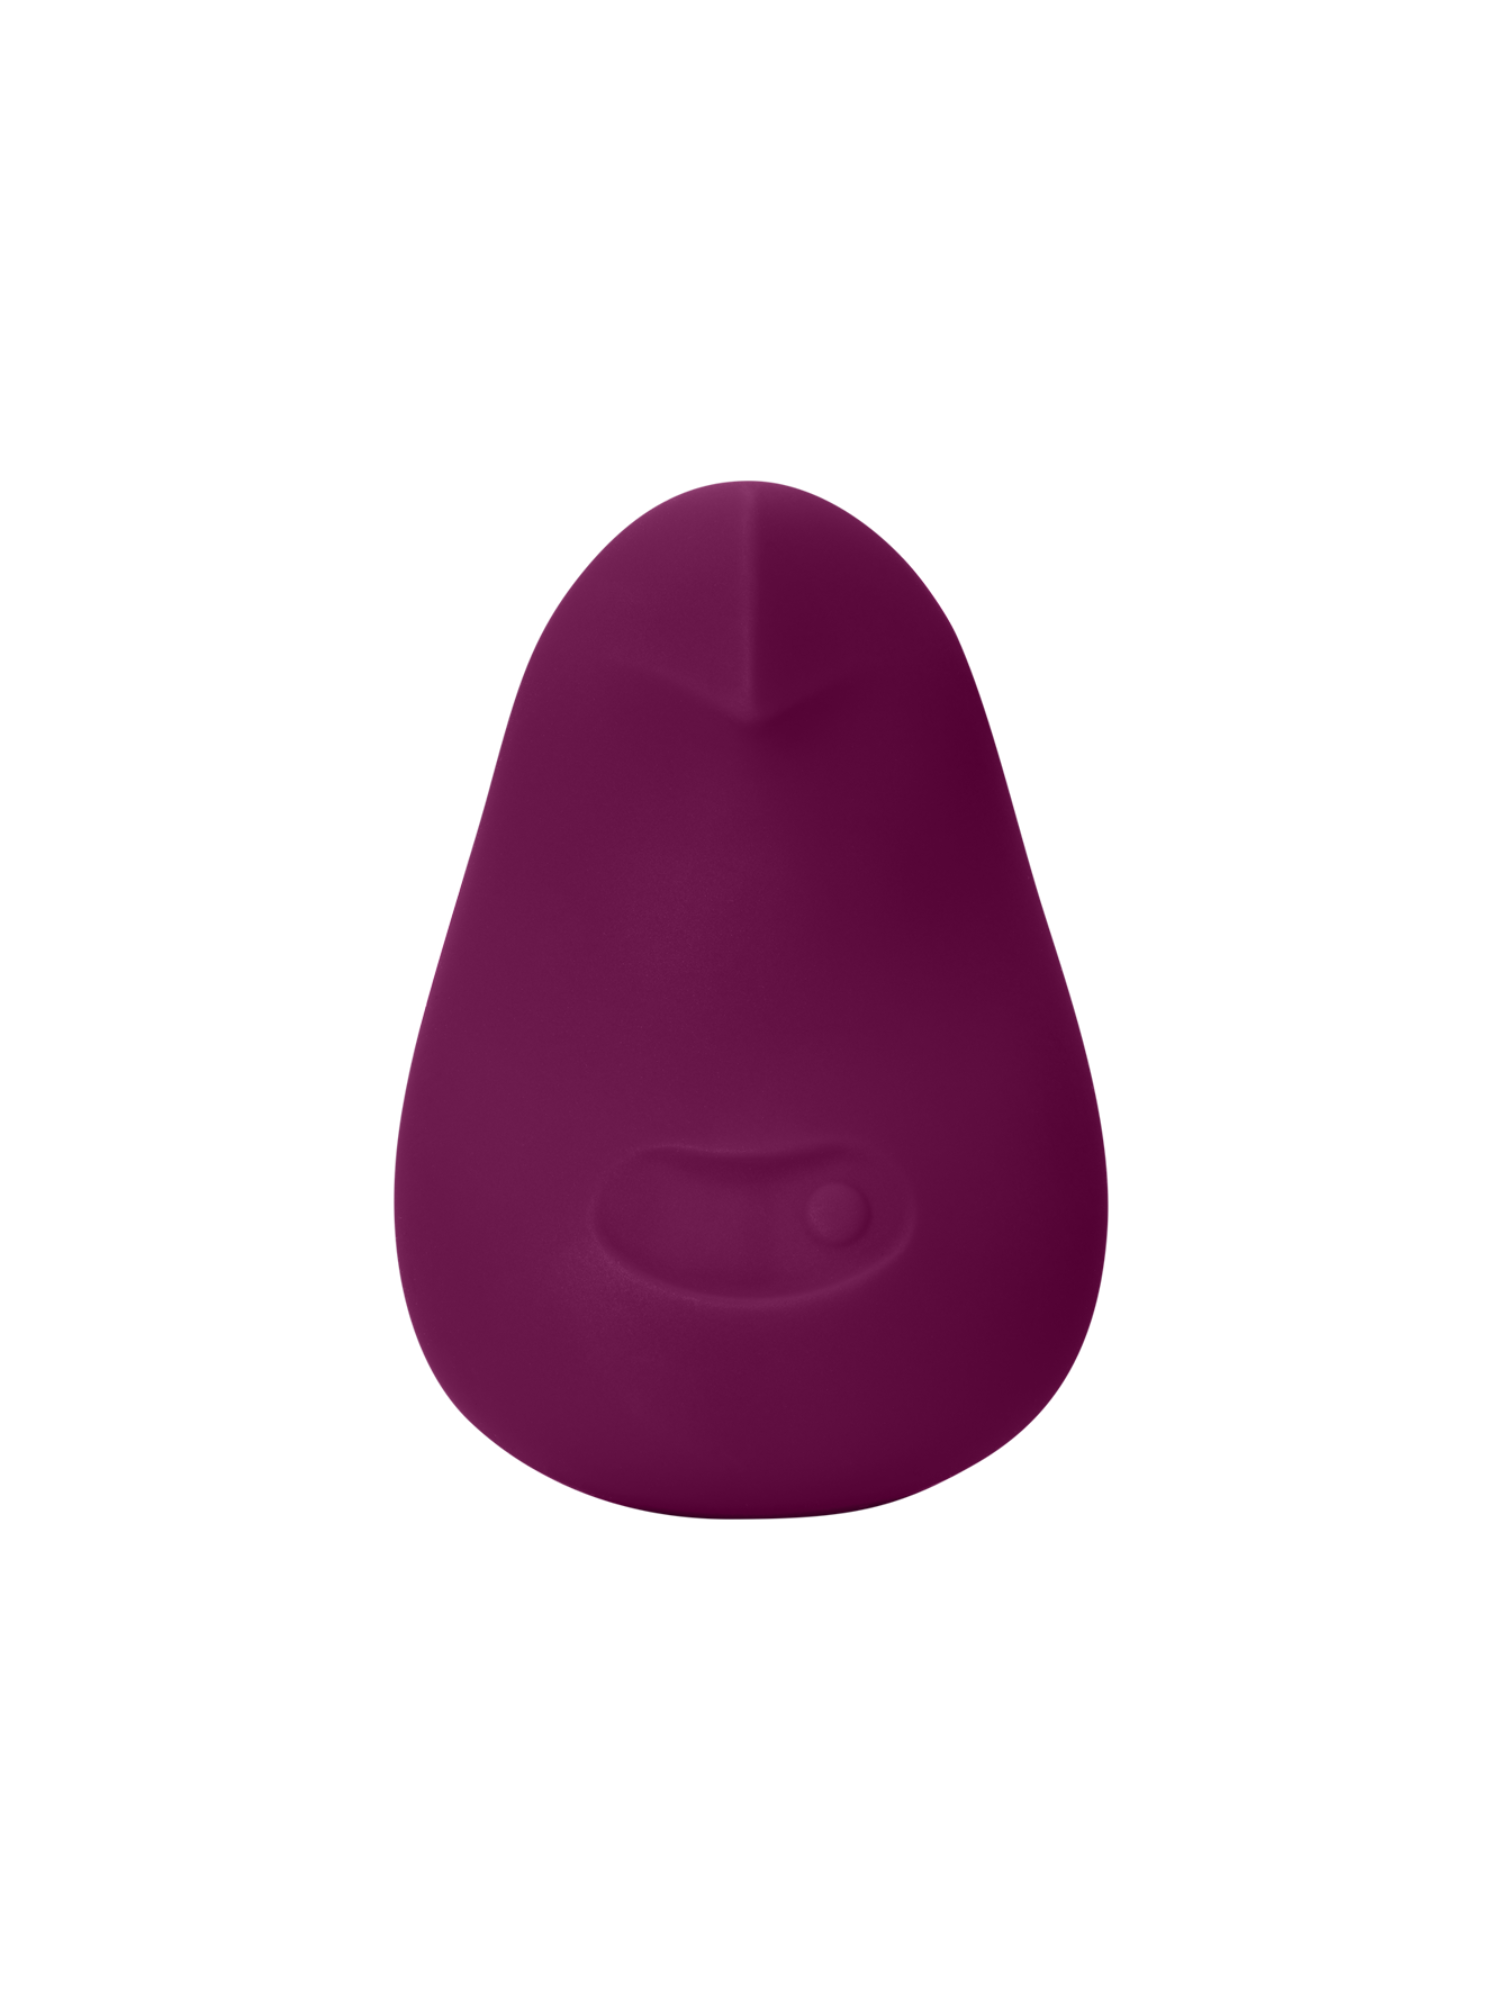 Pom Dame, Vibrator, Berry, Nourished, sexual wellness, clit stimulating, waterproof, internal+external, medical grade silicone, 5 patterns, 5 intenties , Flexible Vibrator, sex toy, pleasure, sexual pleasure ,sex, toy, sexual satisfaction, bedroom, vagina, vulva, sex speeltje, flexible, orgasm, medical grade sex toy